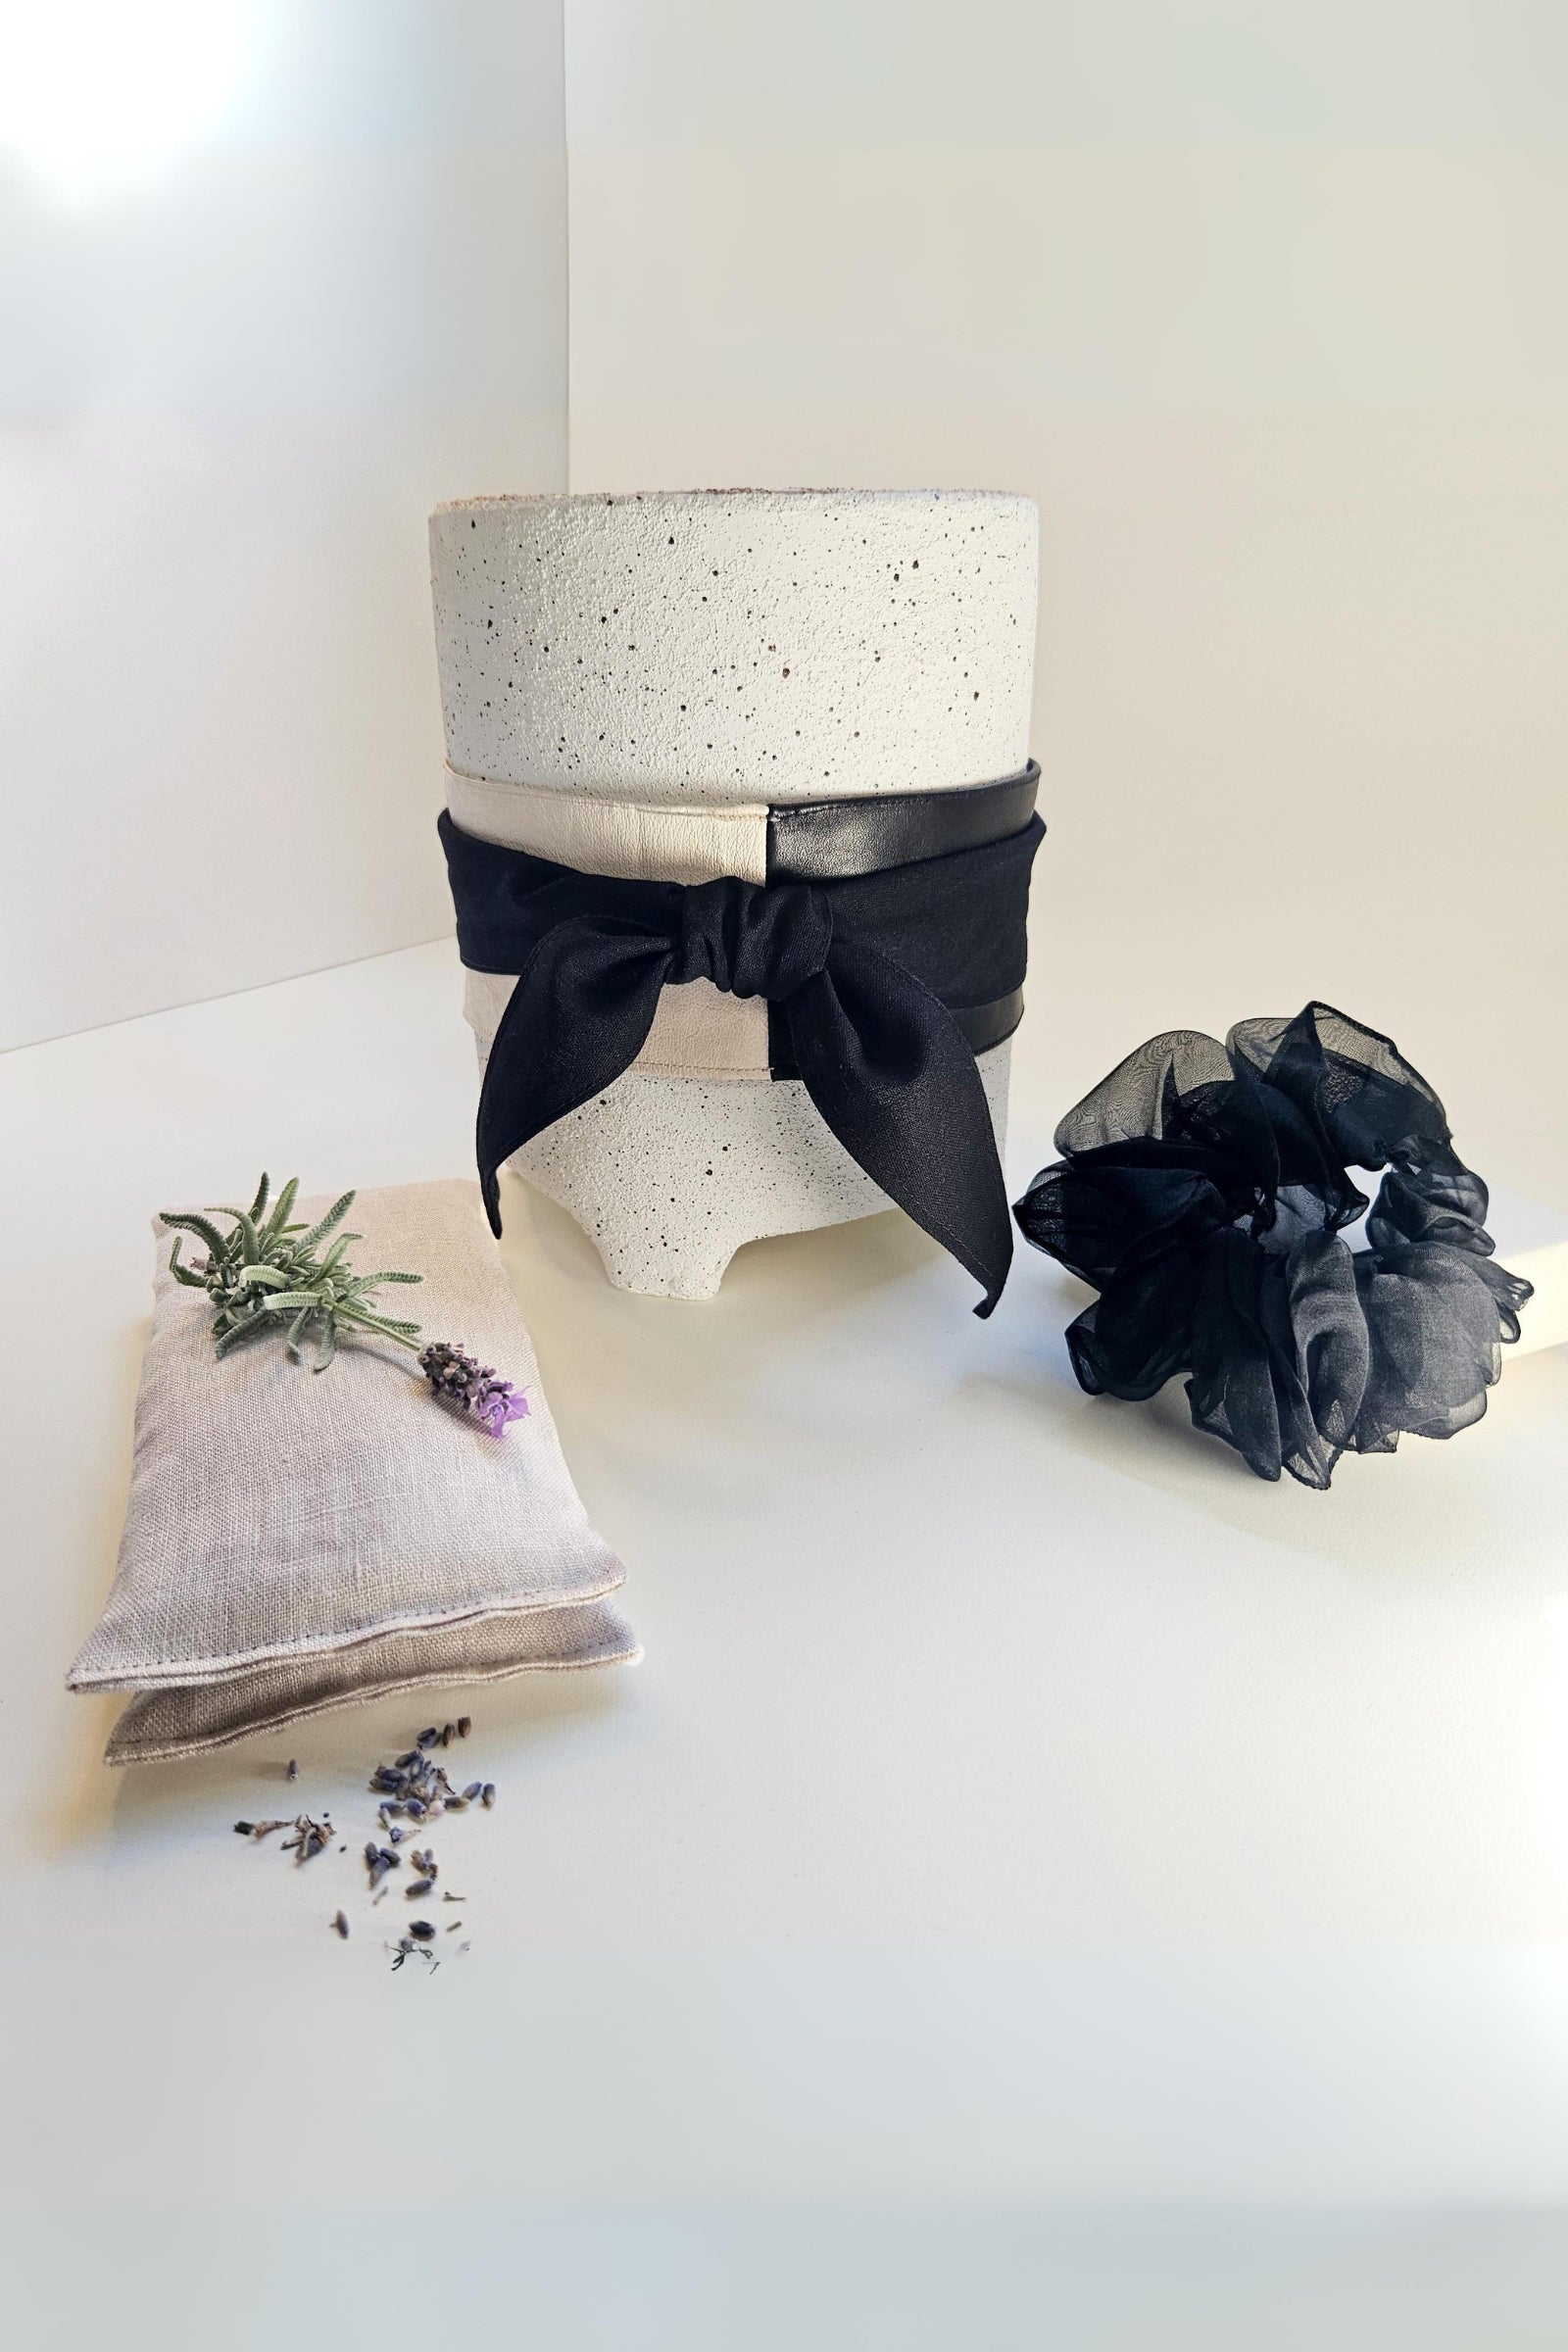 VOUS Gift Box with Linen Obi Style Belt - VOUS Contemporary Clothing